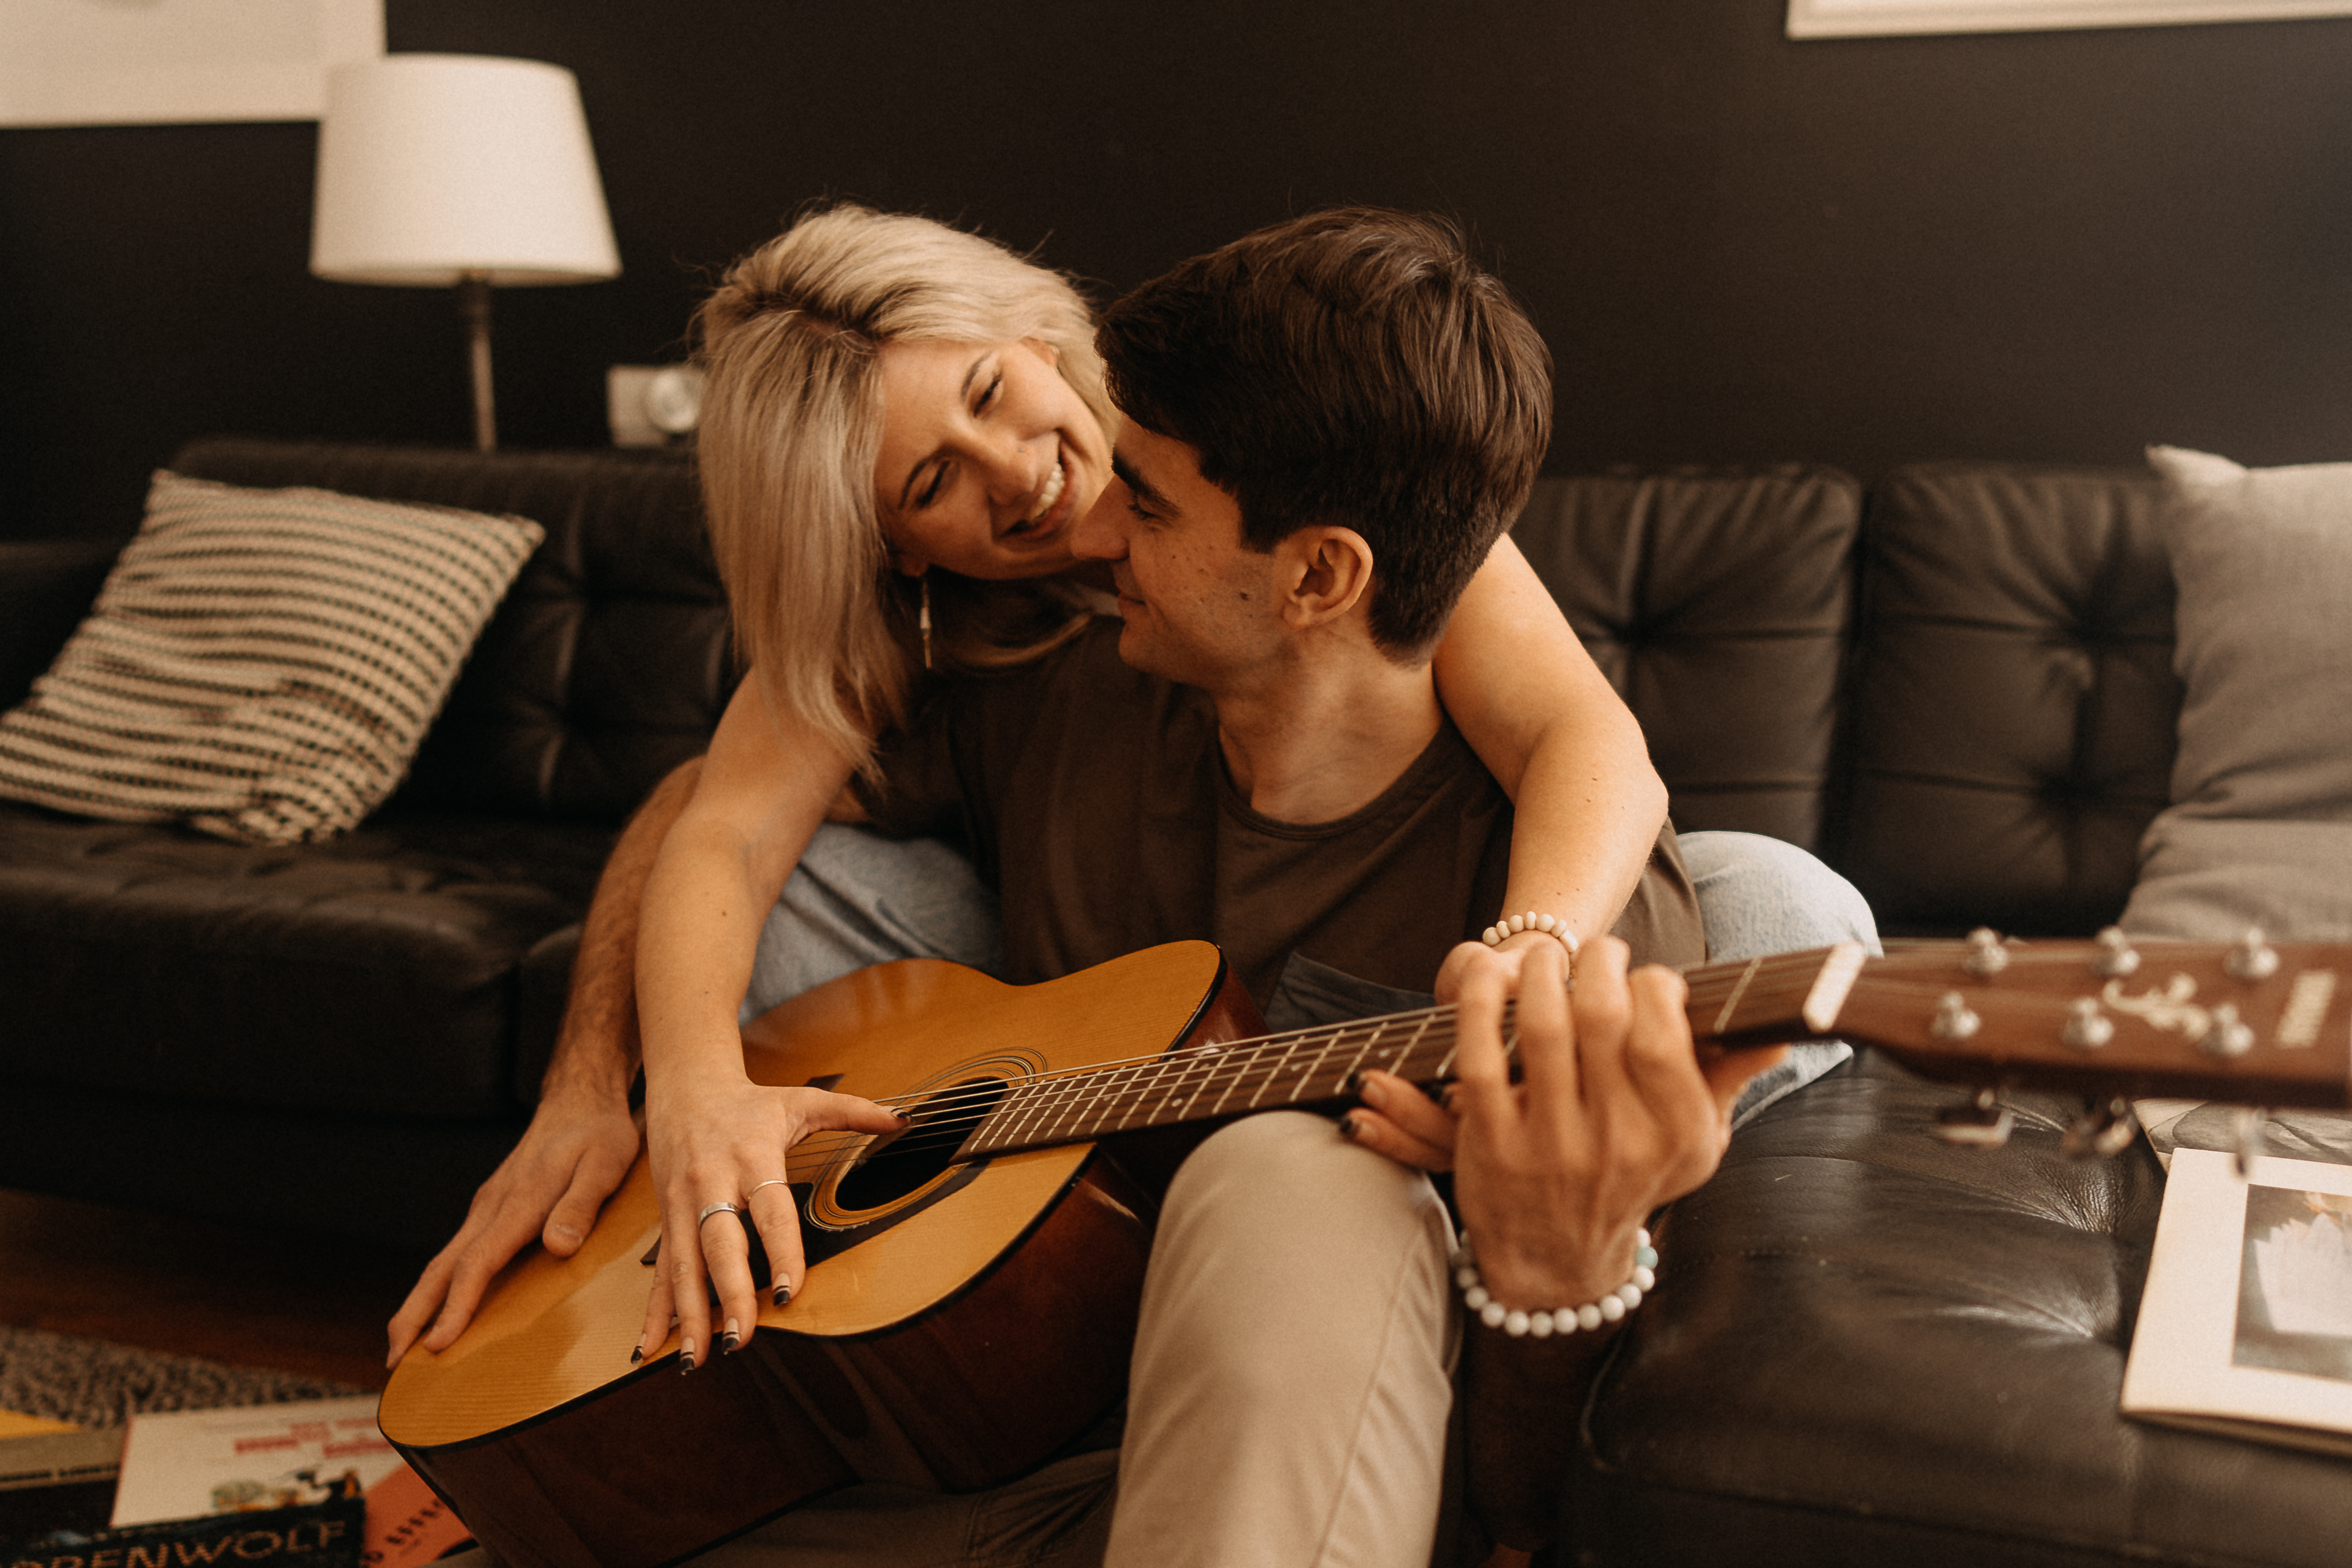 https://winsomephotos.co/wp-content/uploads/2023/03/intimate-connection-session-with-twin-cities-couples-photographer-K7401081.jpg